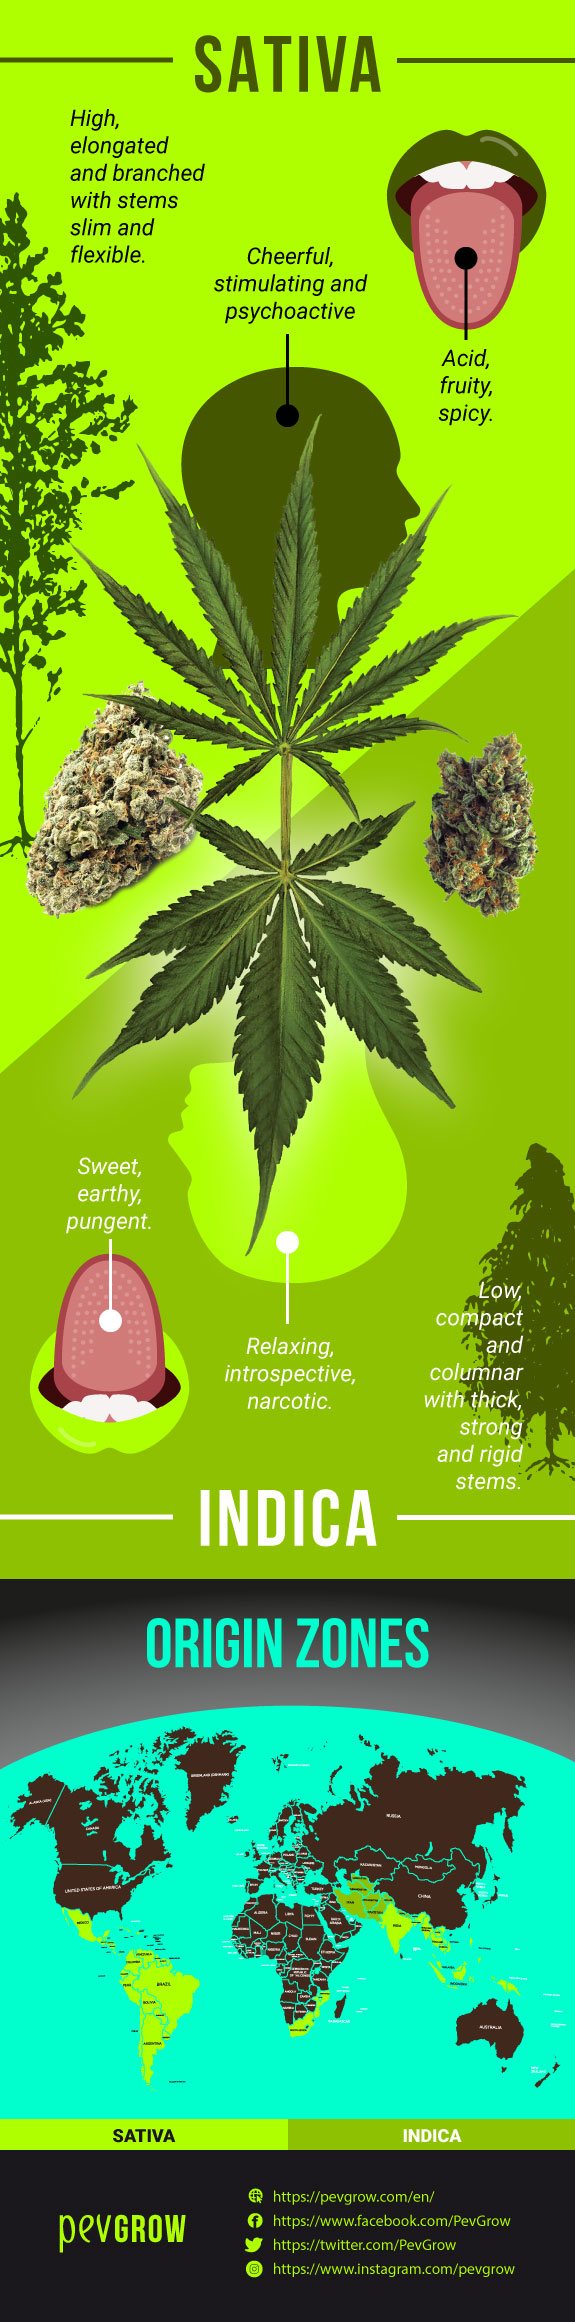 Infographics comparing the characteristics of a Sativa plant and an Indica plant.